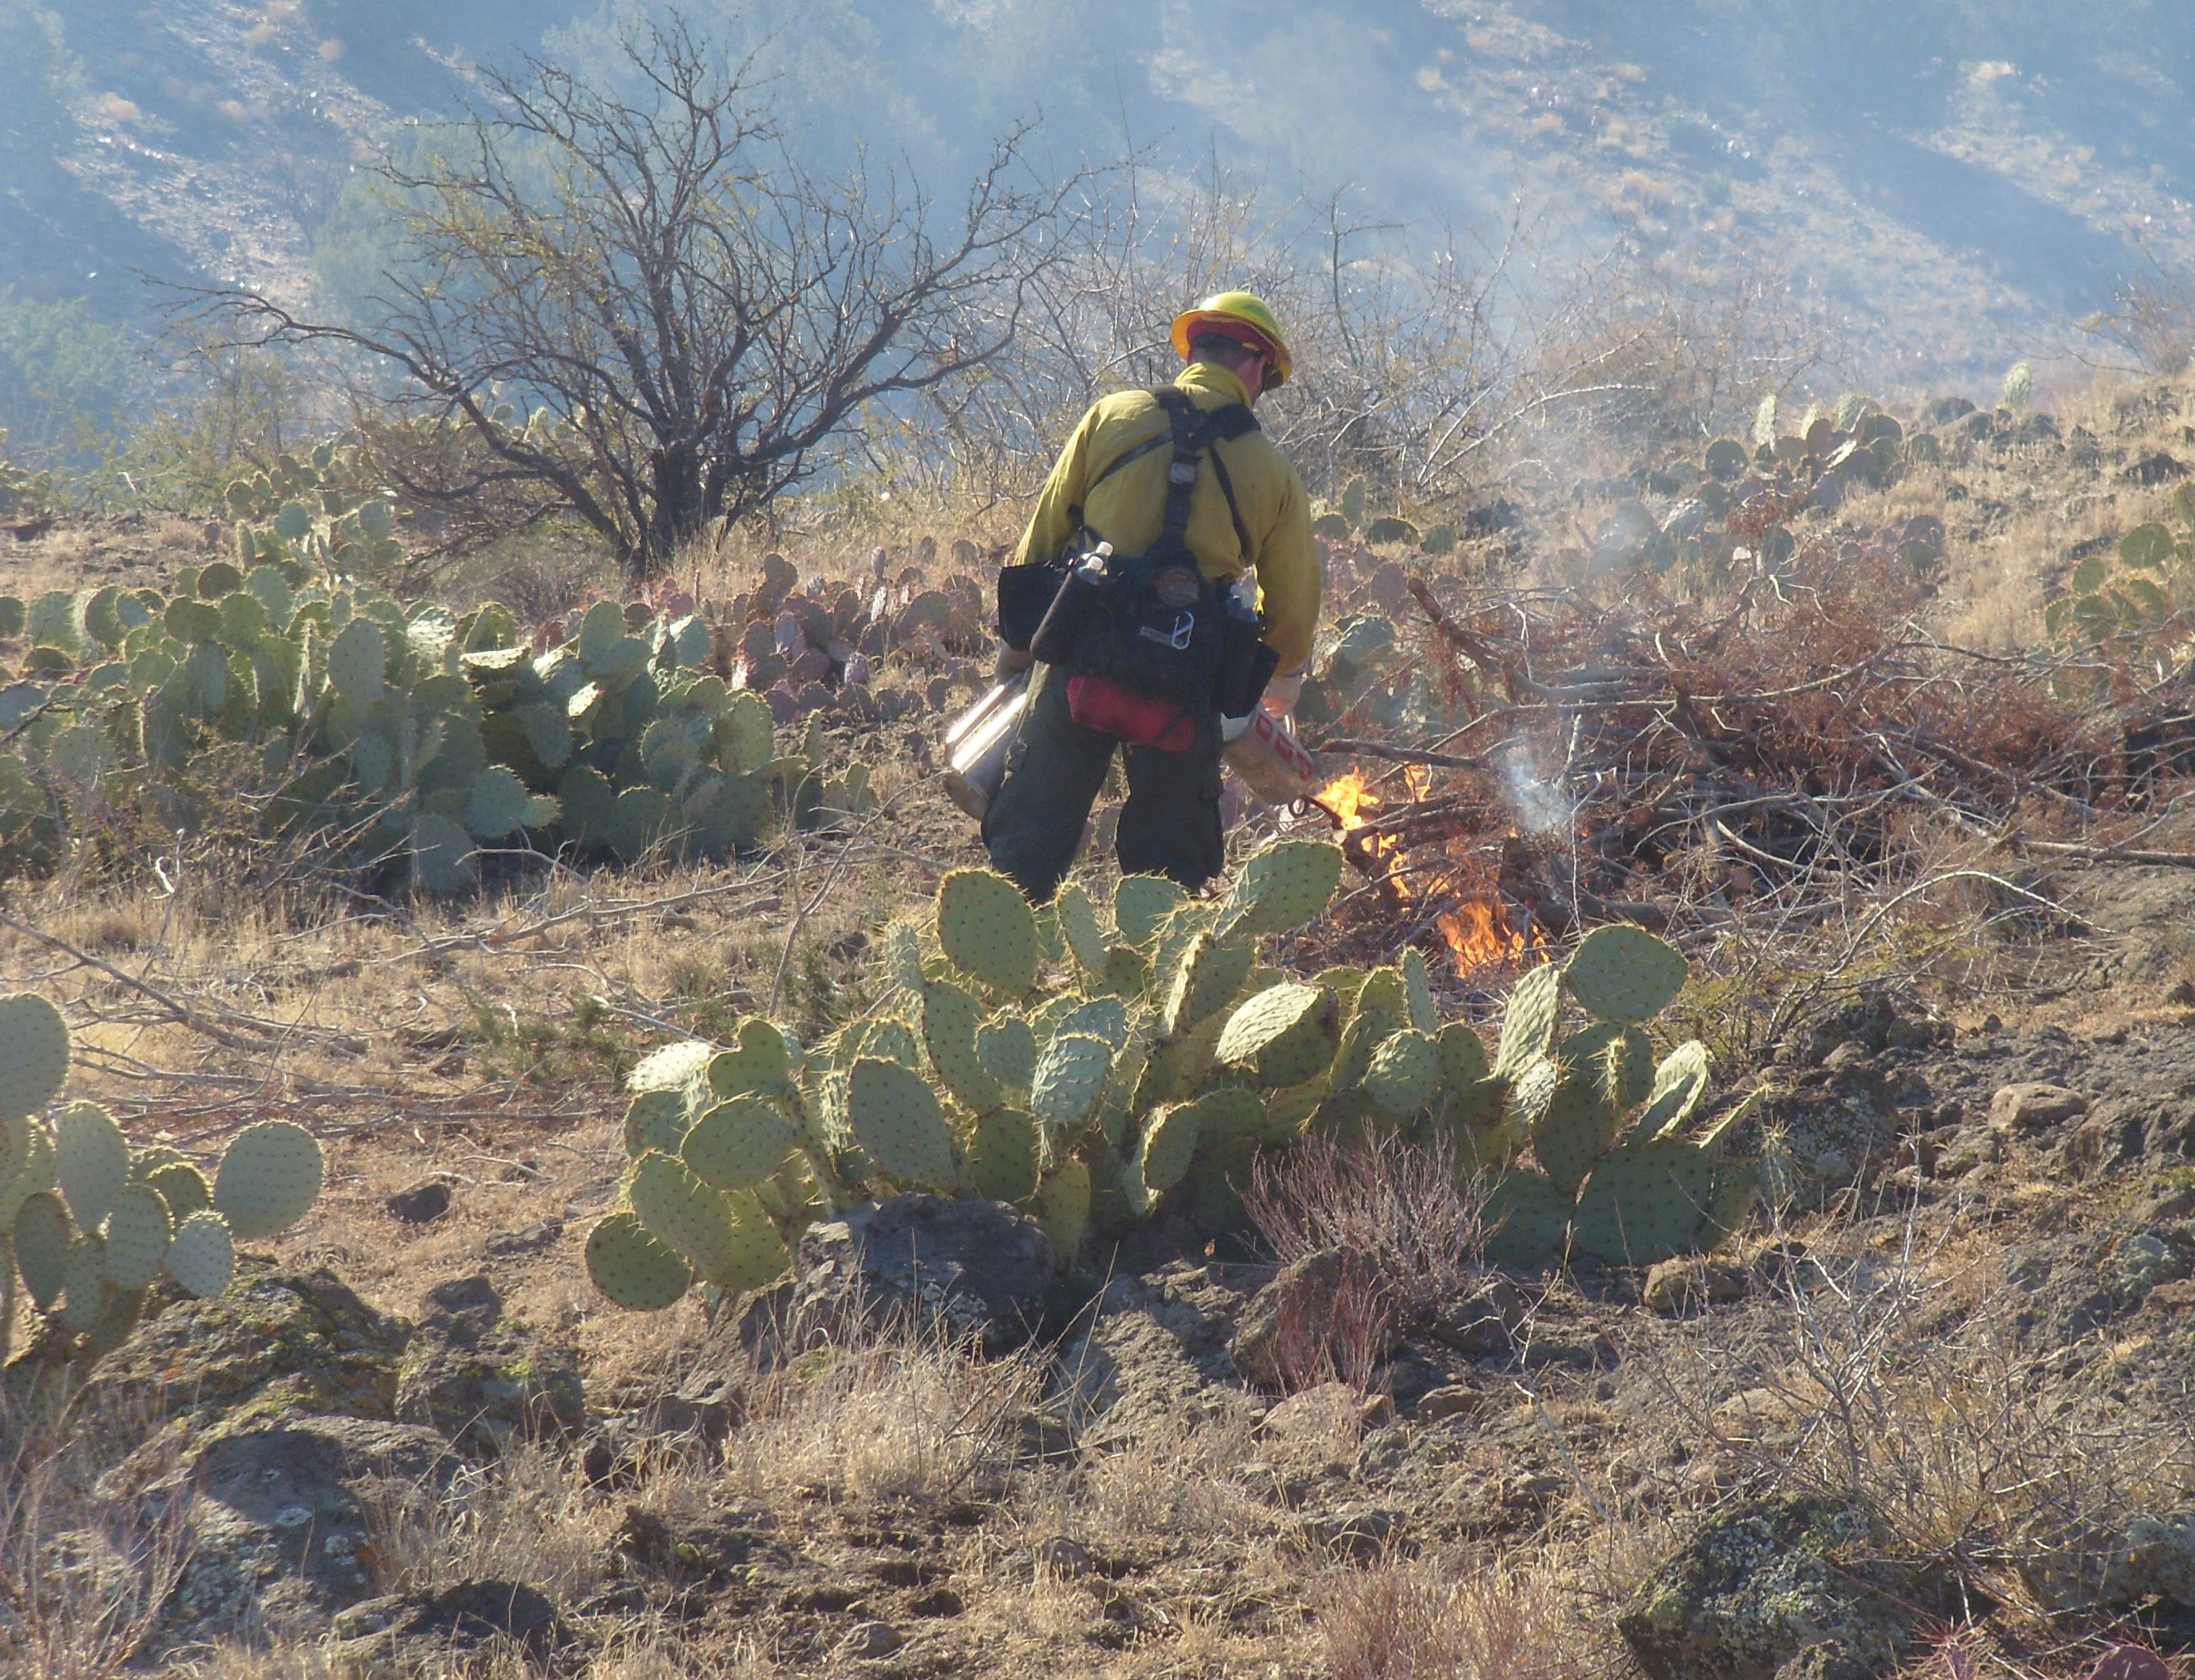  Photo: A firefighter ignites a brush pile during a past prescribed burn on the Agua Fria National Monument / BLM file photo